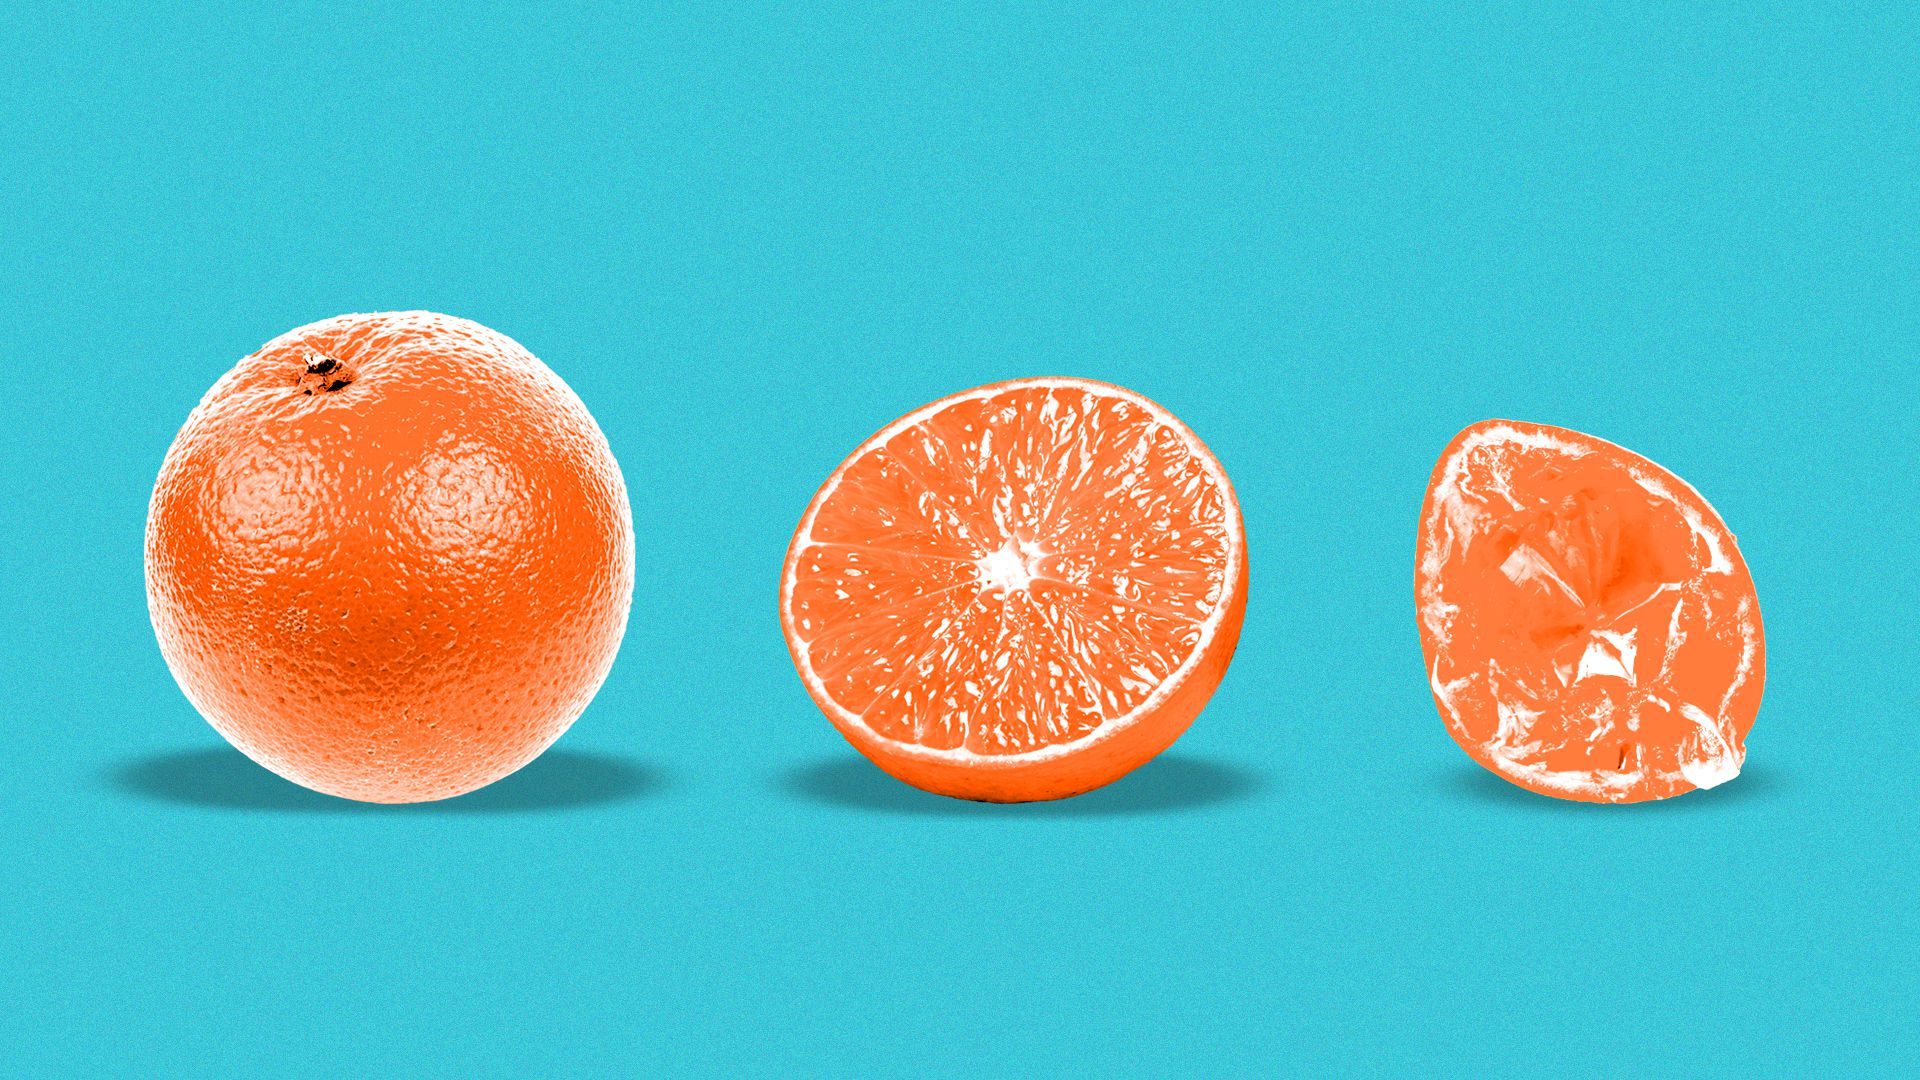 Illustration of three oranges, one full, one cut in half, and another half that has been squeezed.